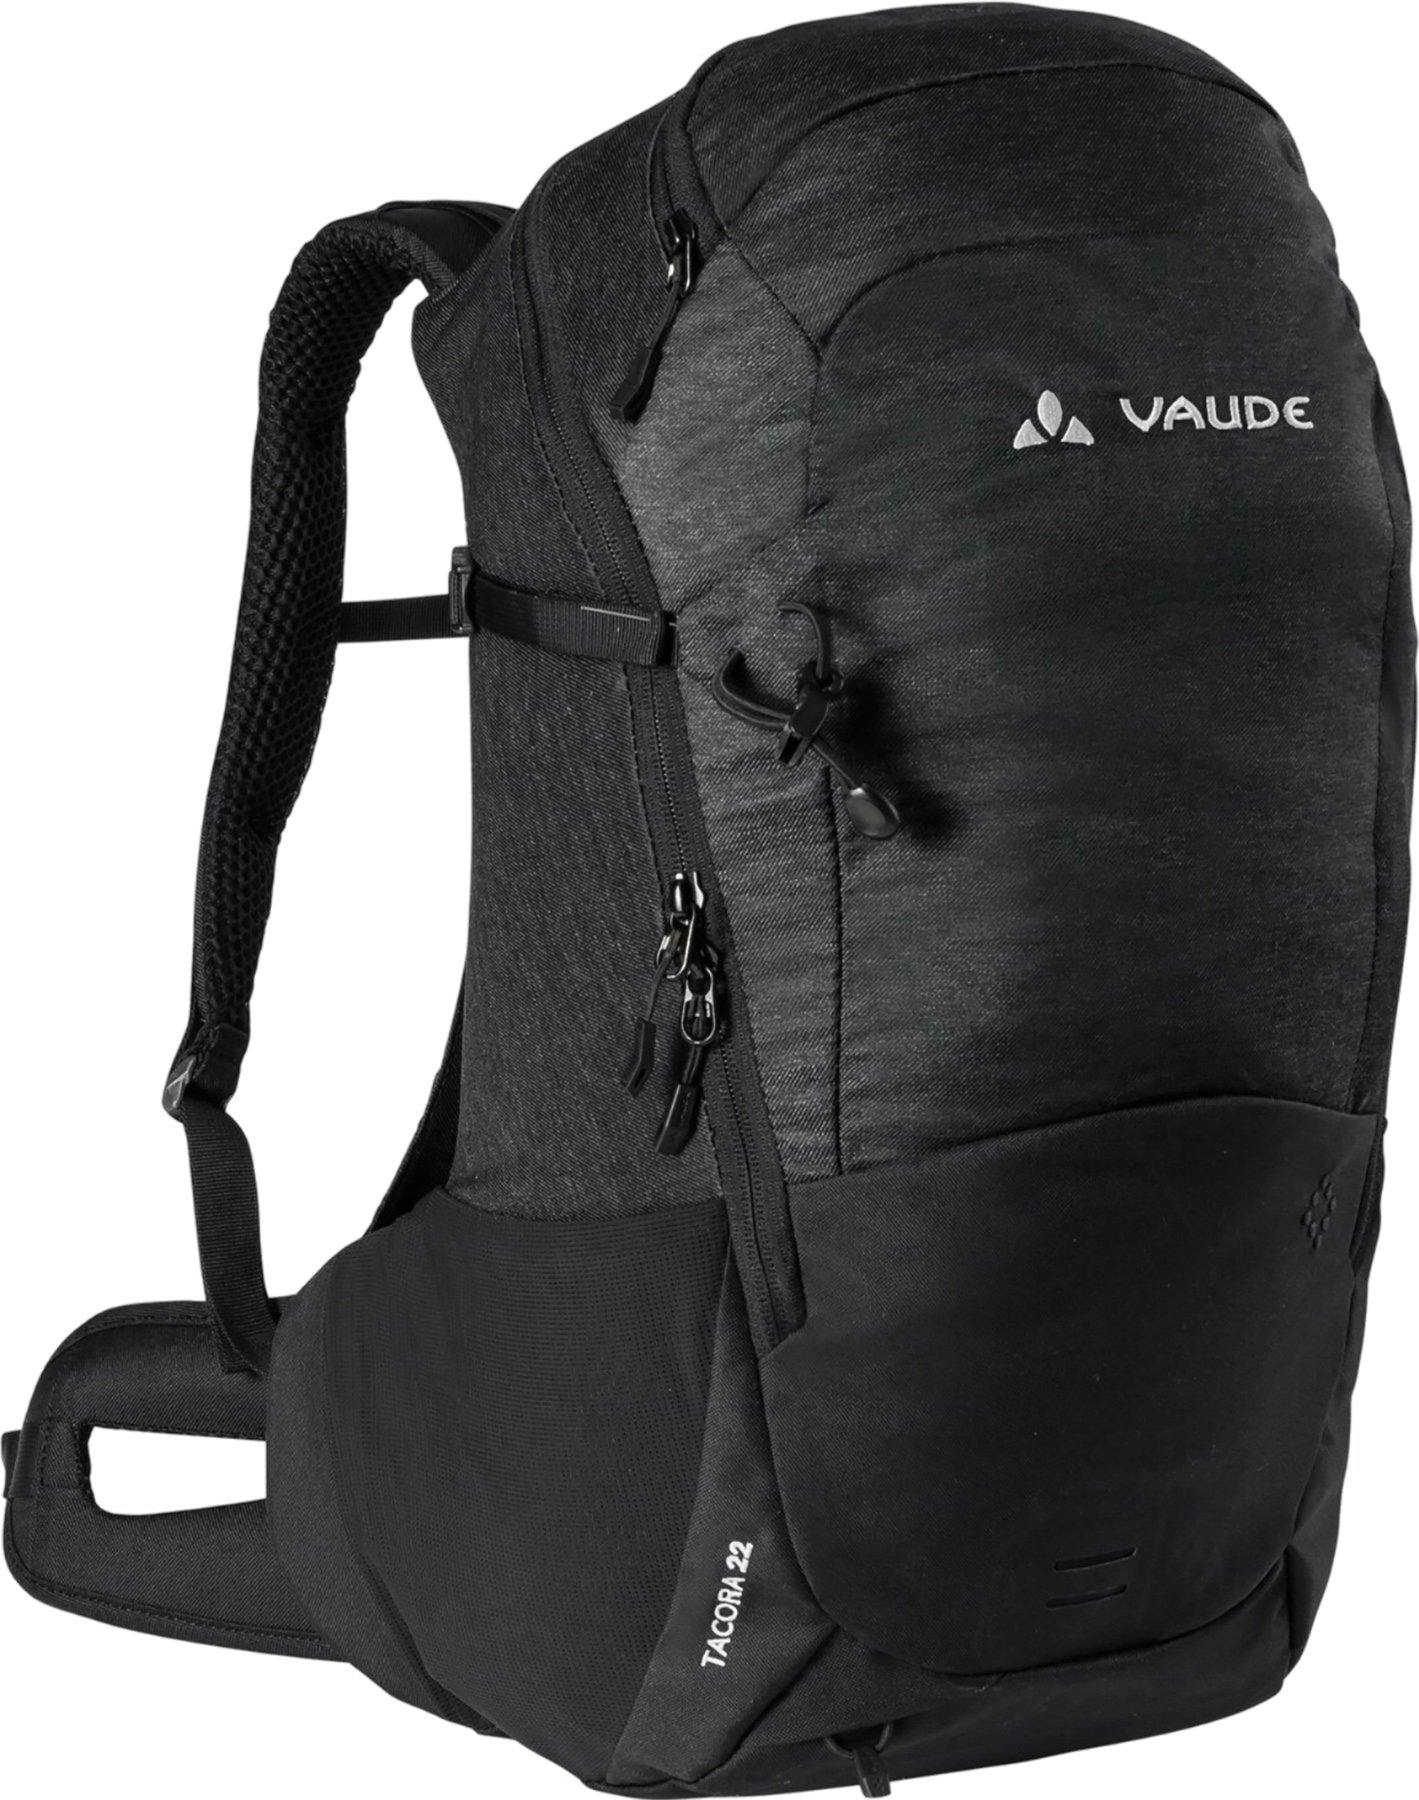 Product image for Tacora Hiking Pack 22L - Women's